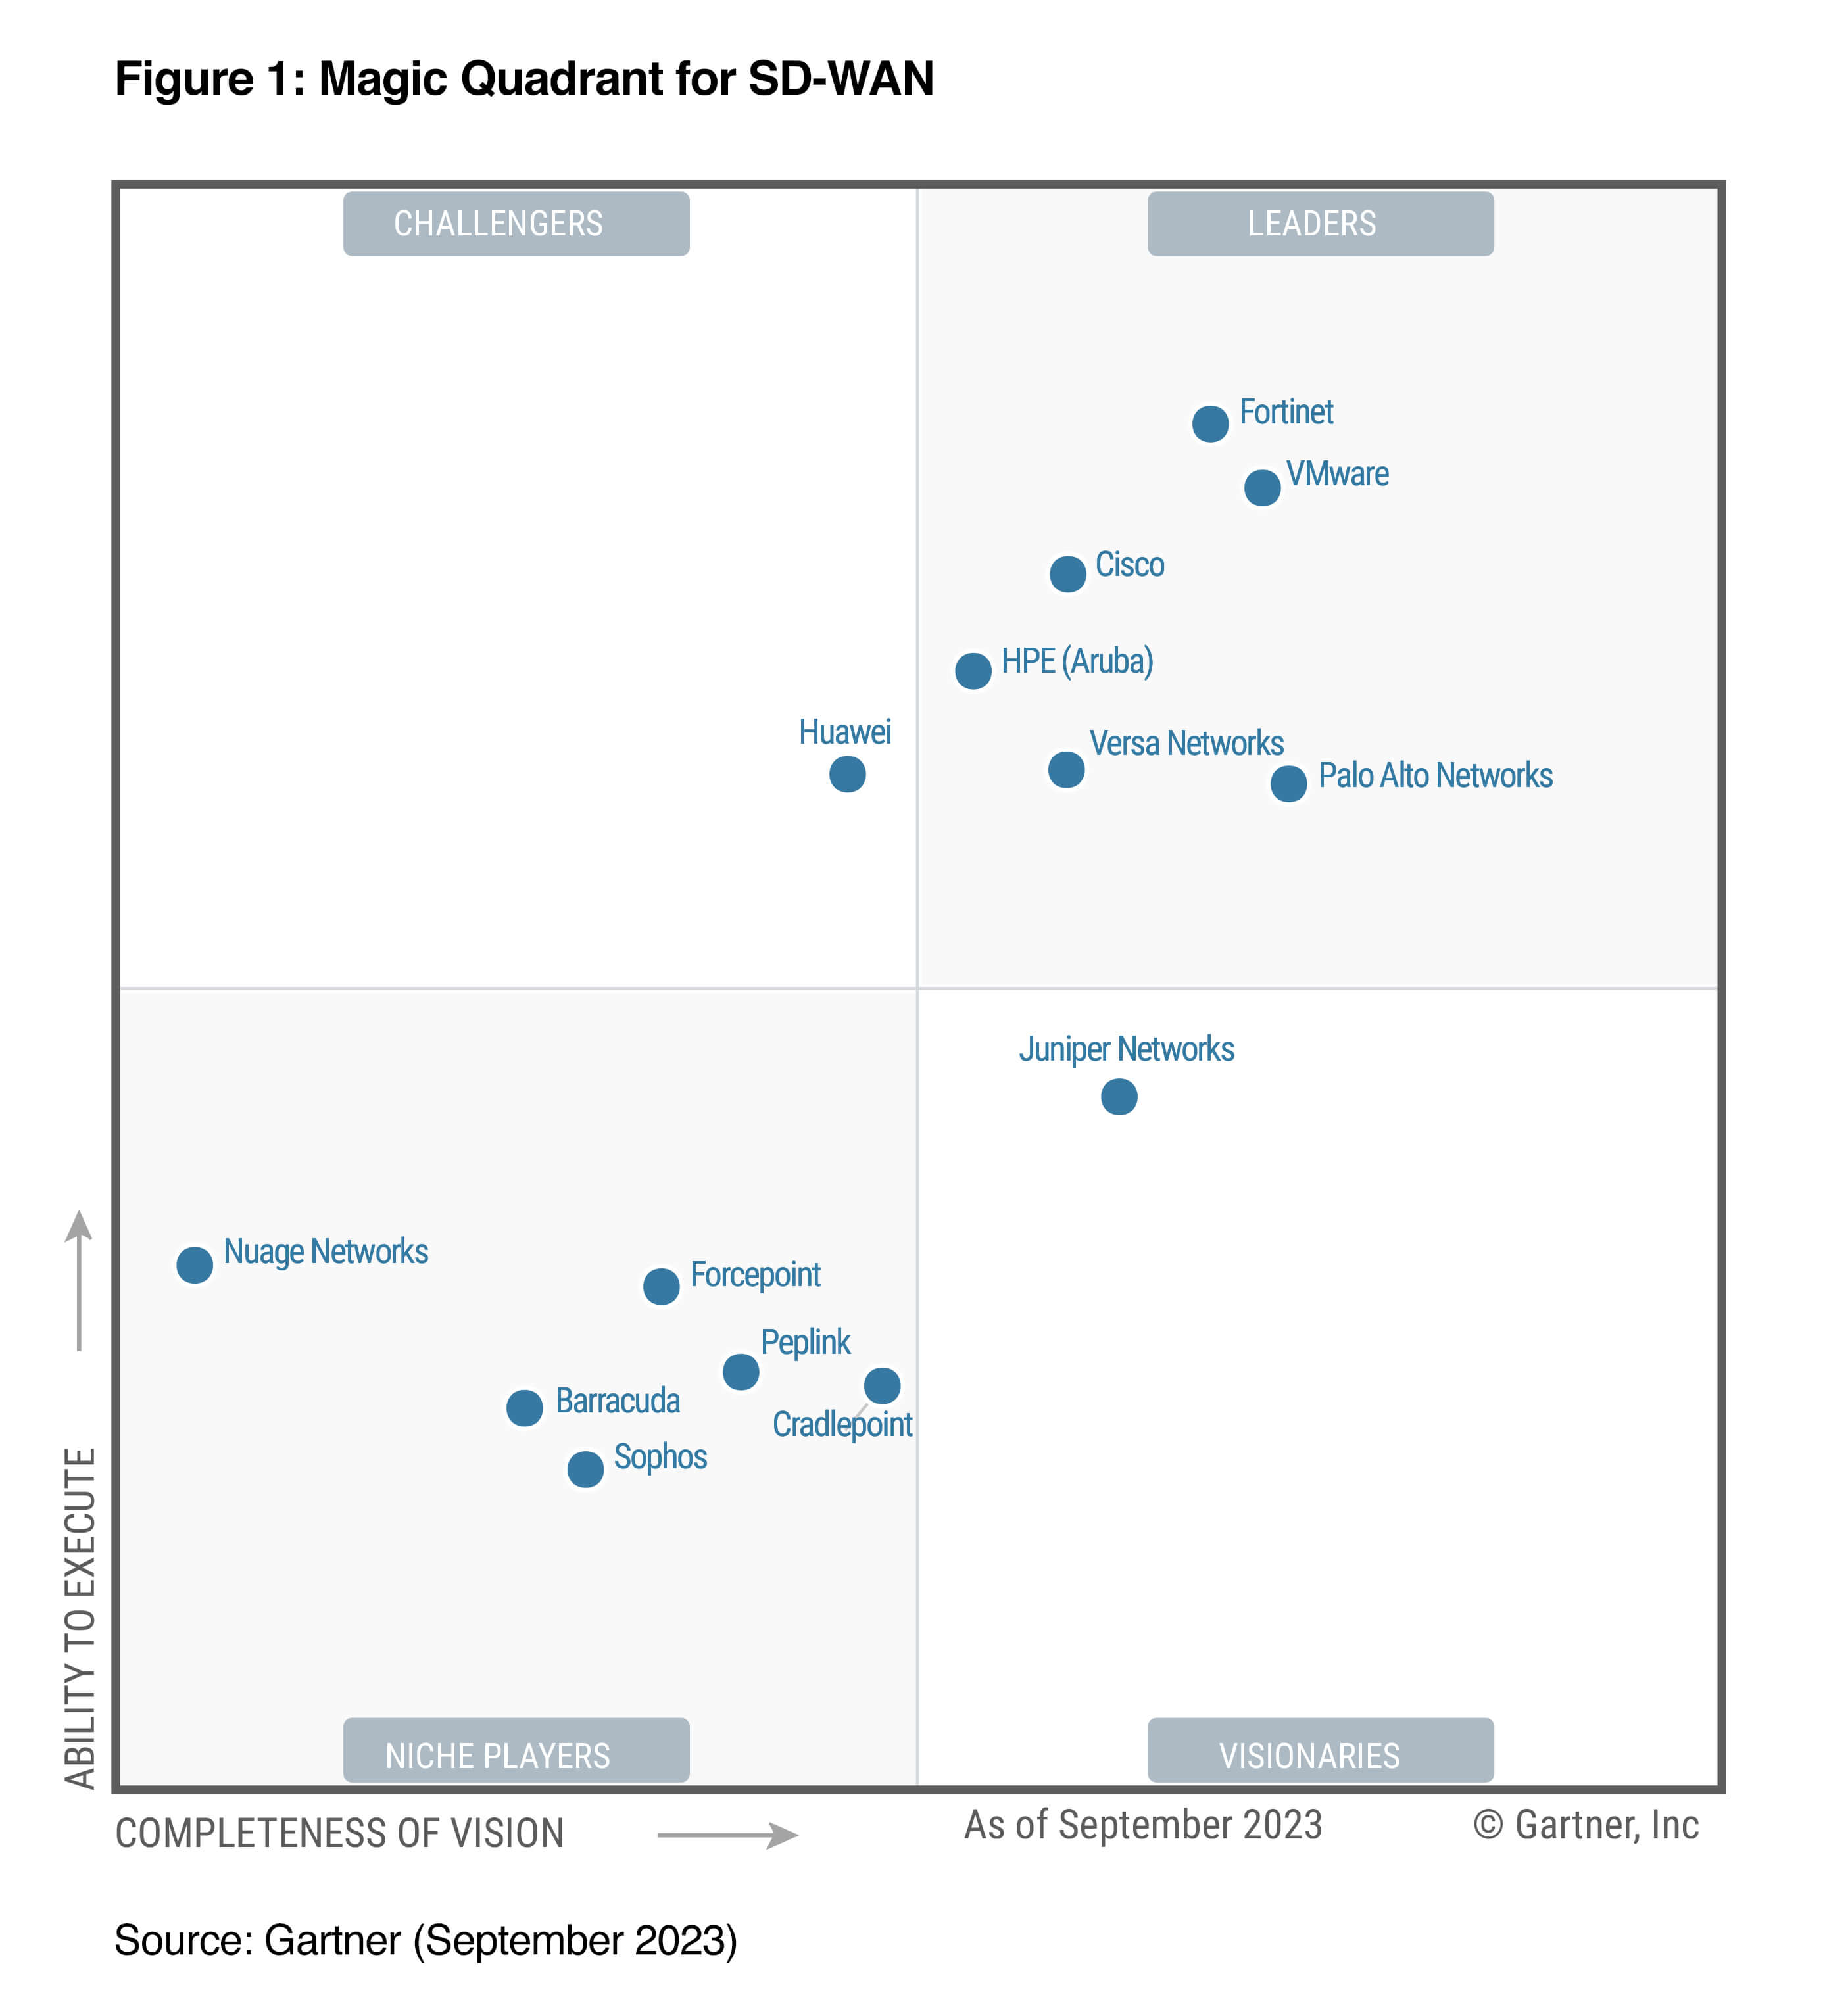 2023 Gartner® Magic Quadrant™ for SD-WAN Figure 1. The figure ranks companies on their ability to execute and completeness of vision as of September 2023 on a scatter plot. Fortinet is in the upper right quadrant of Leaders.